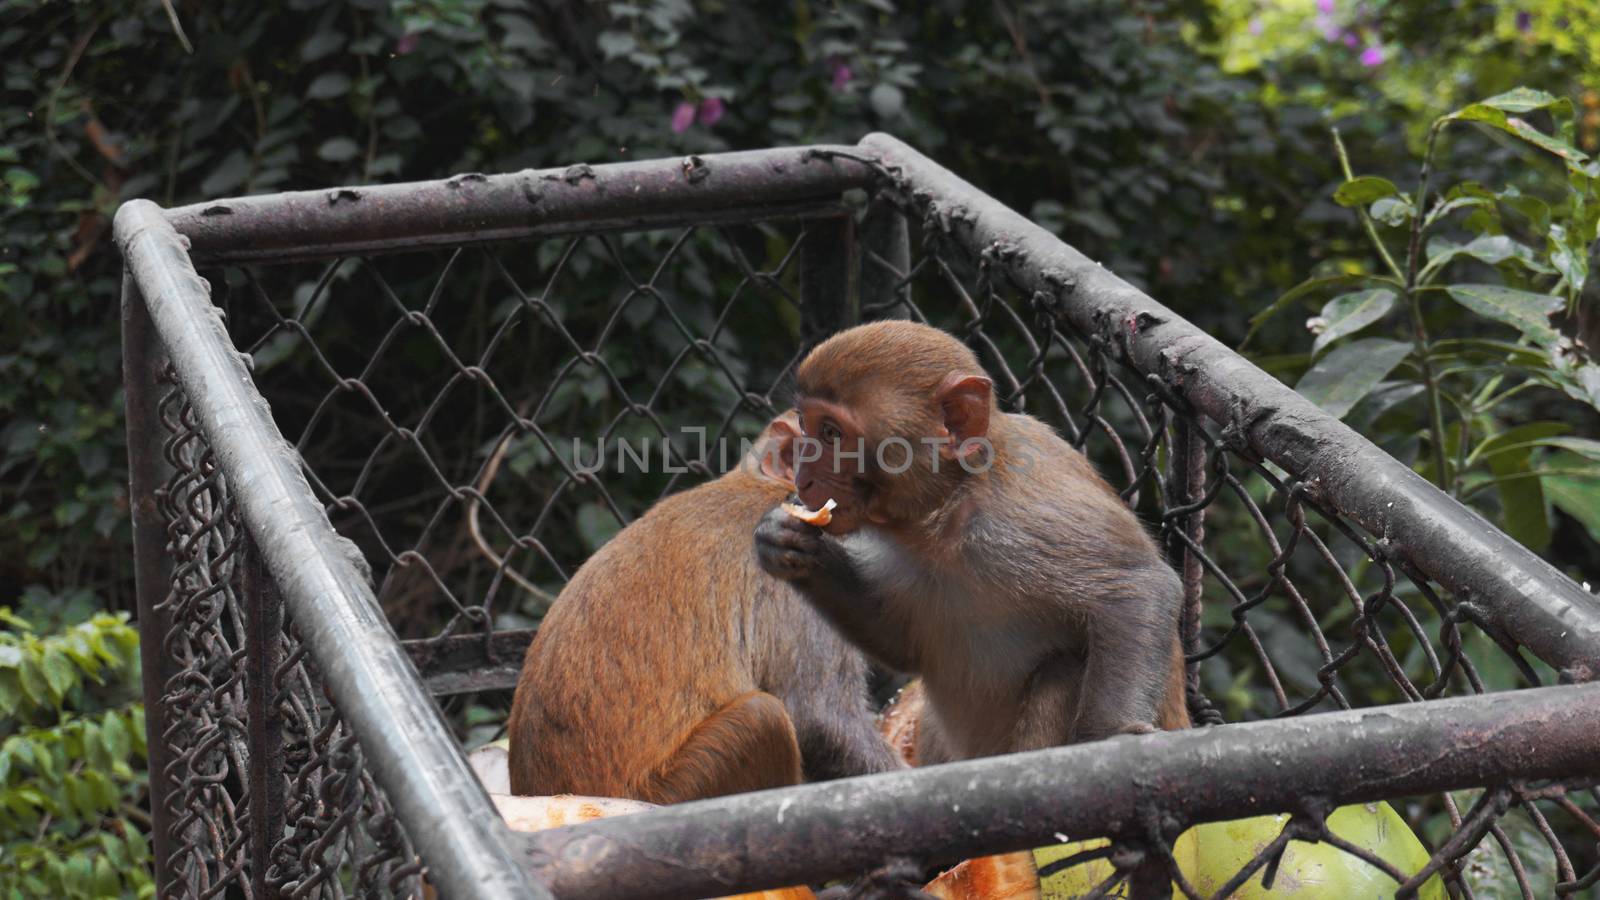 Monkeys steal food fruits from metal carts - animals